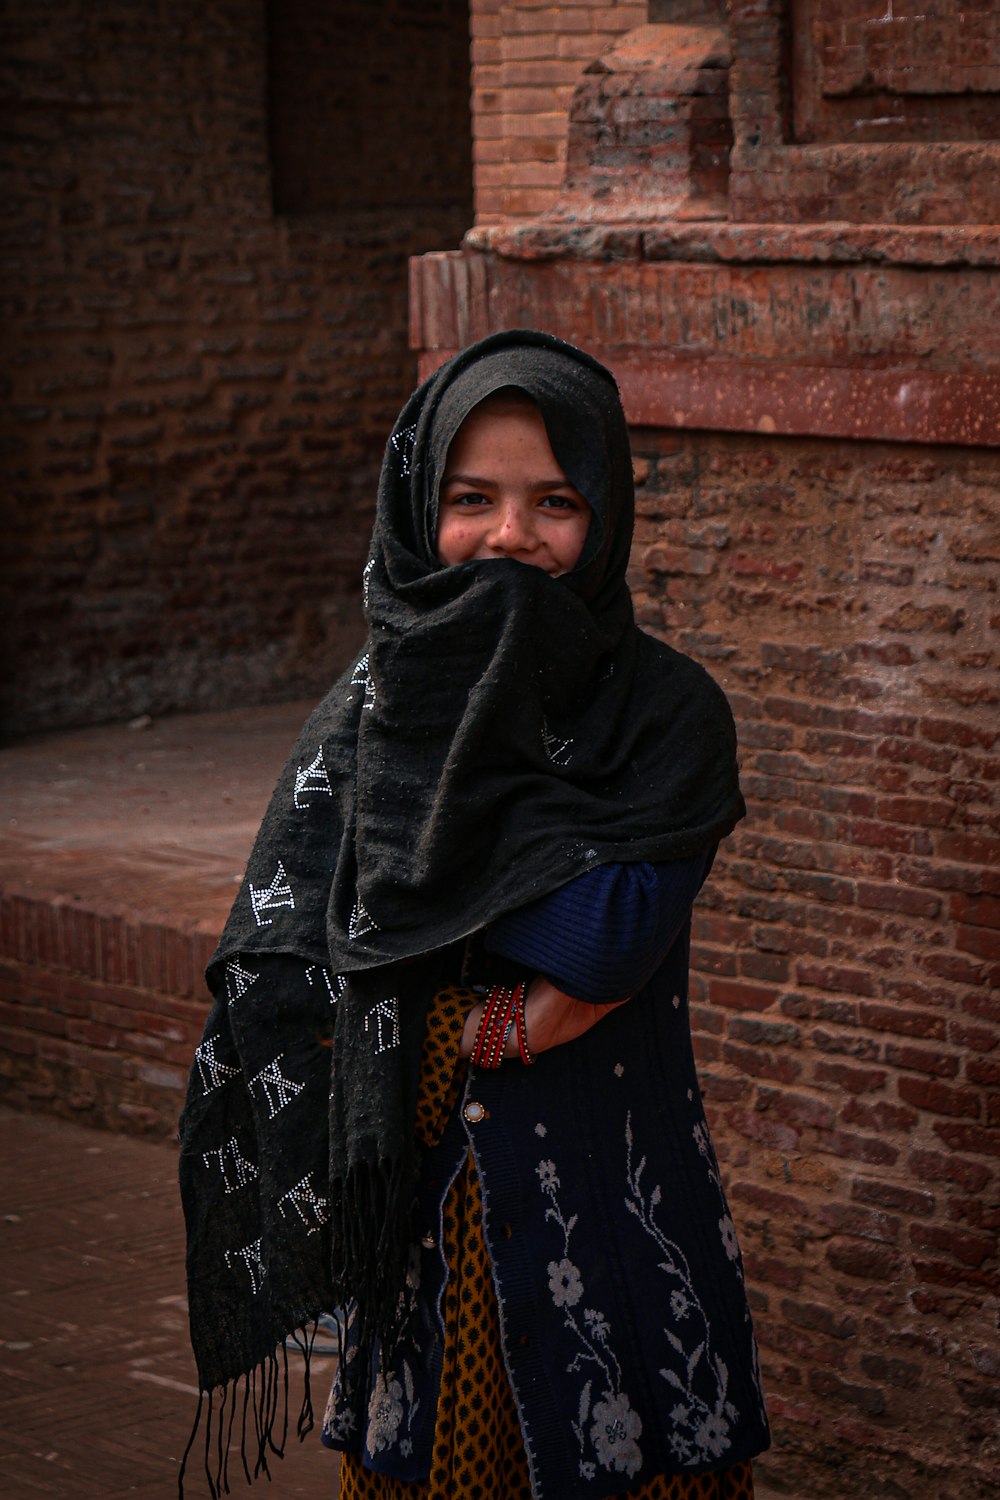 a woman in a black shawl and a brick building